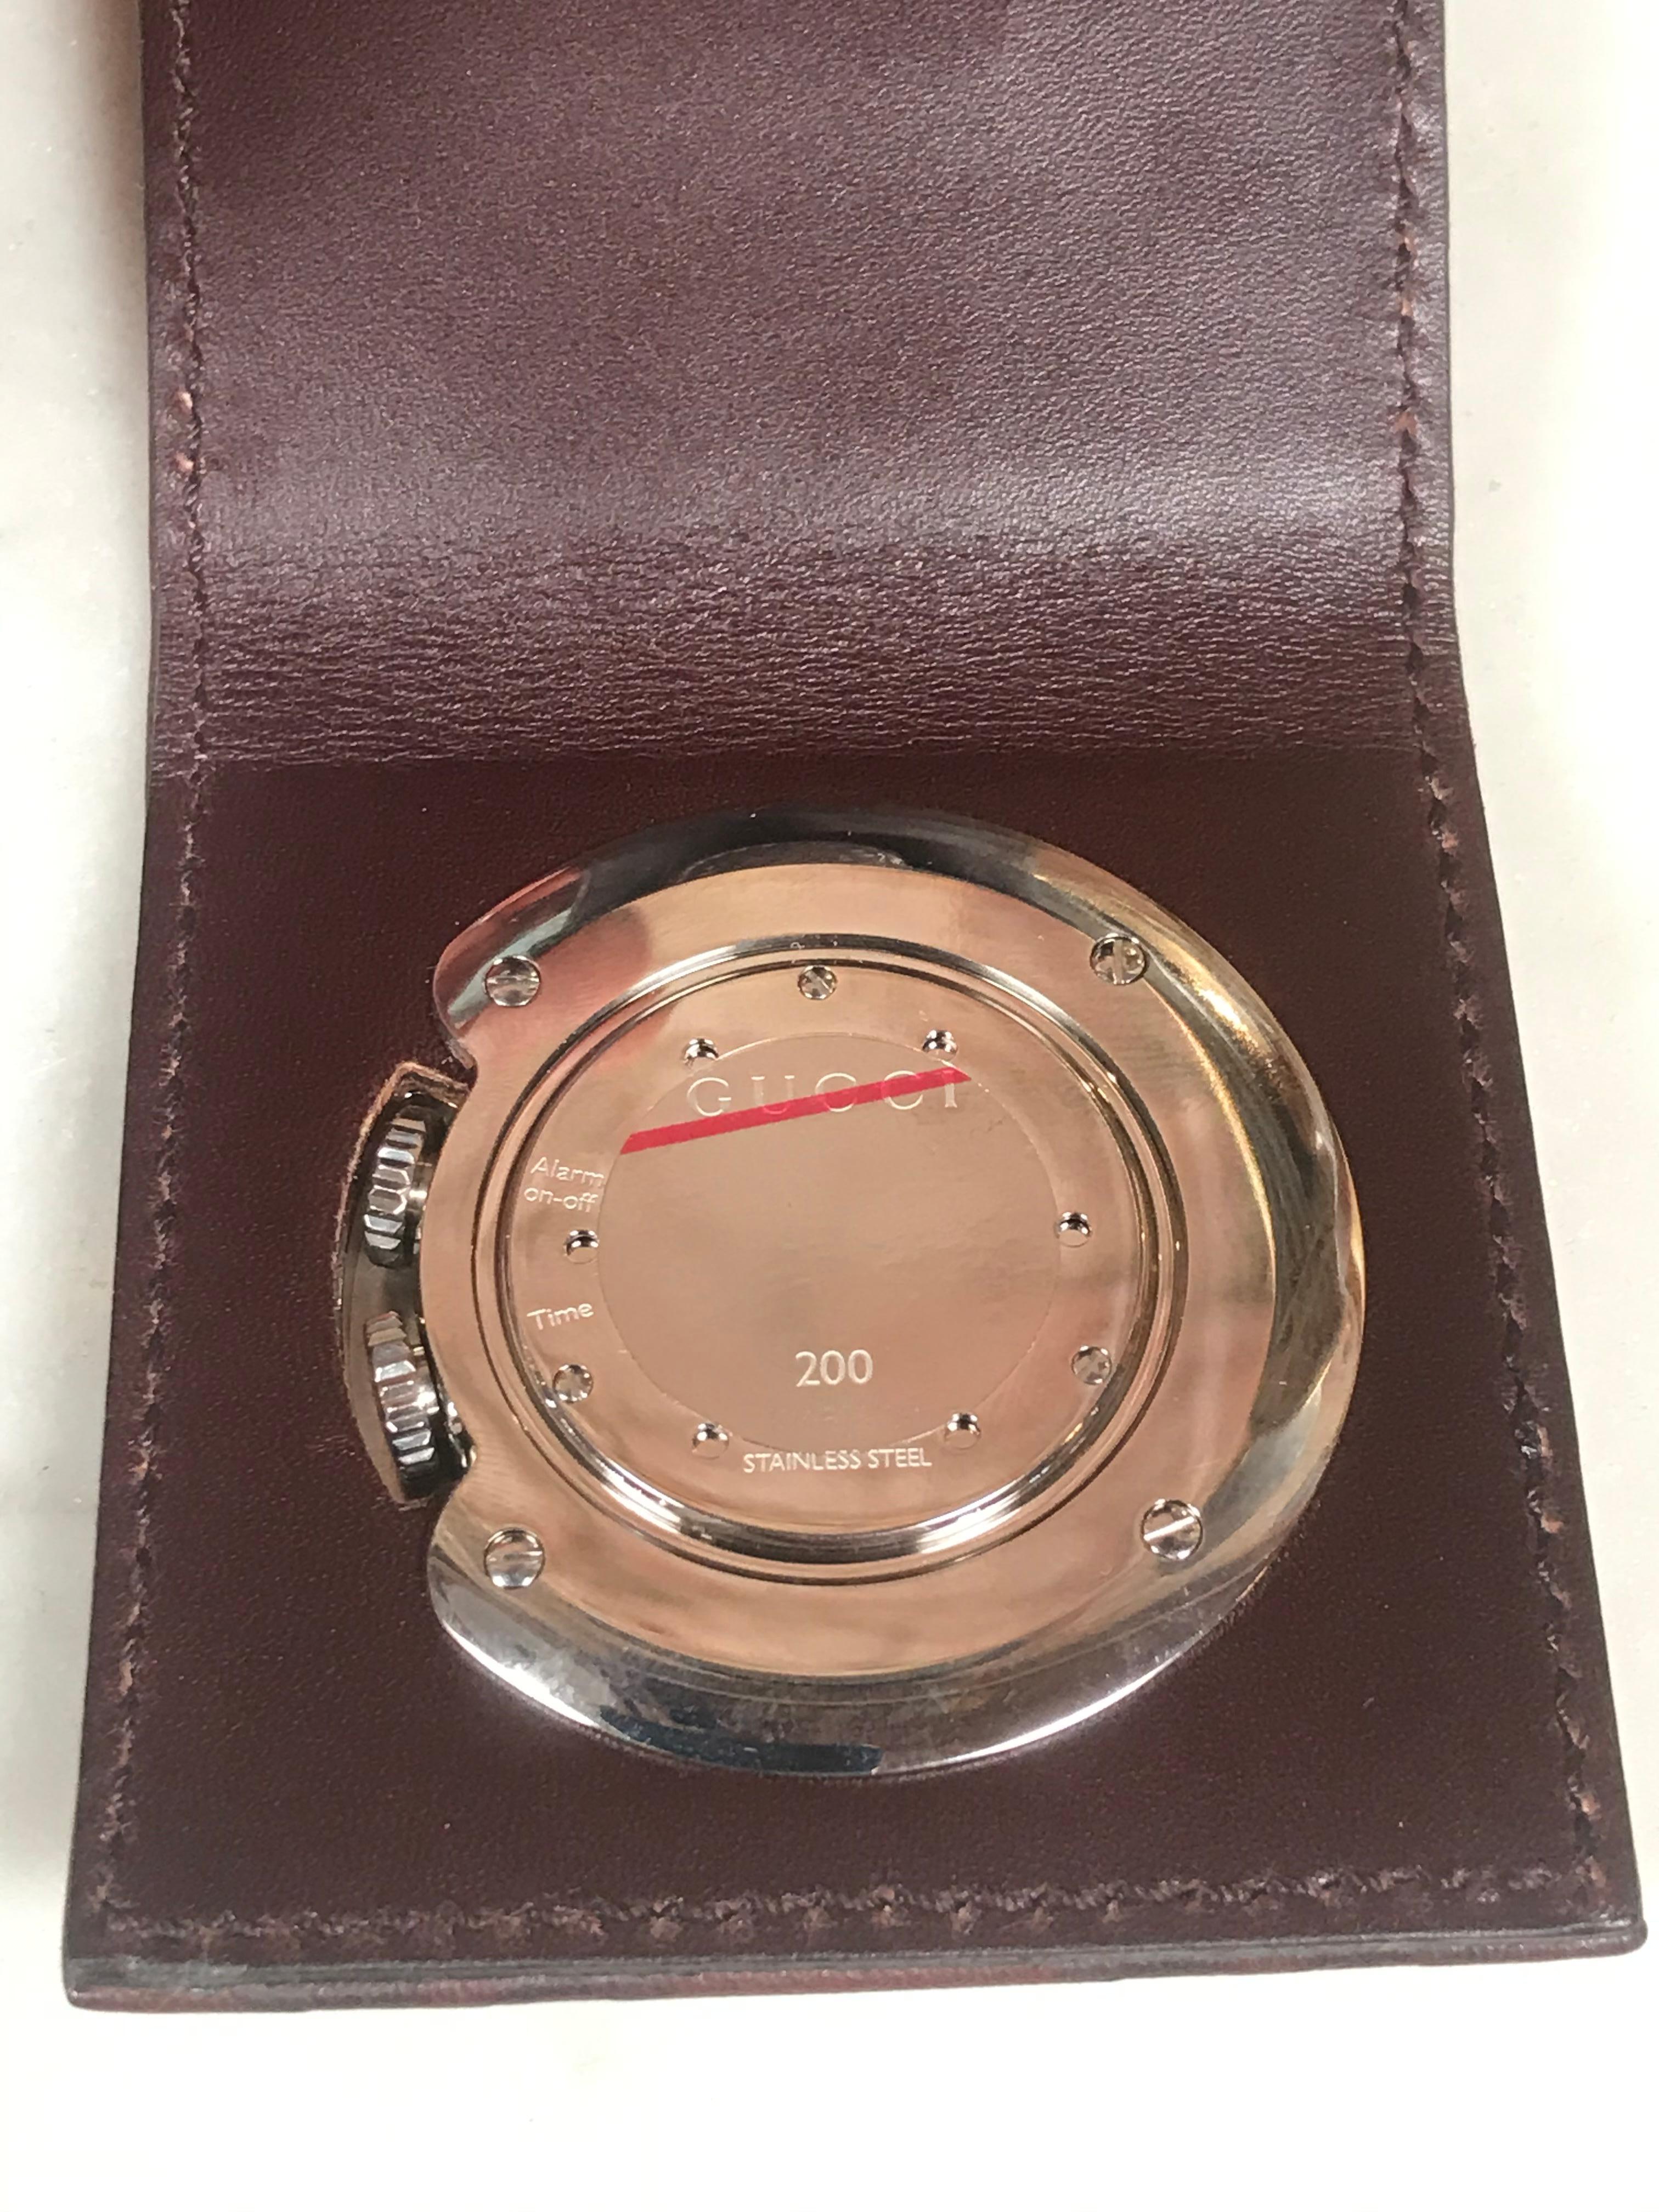 Gucci Limited Edition Brown Travel Desk Alarm Clock/Watch, Italy, 1980s For Sale 1